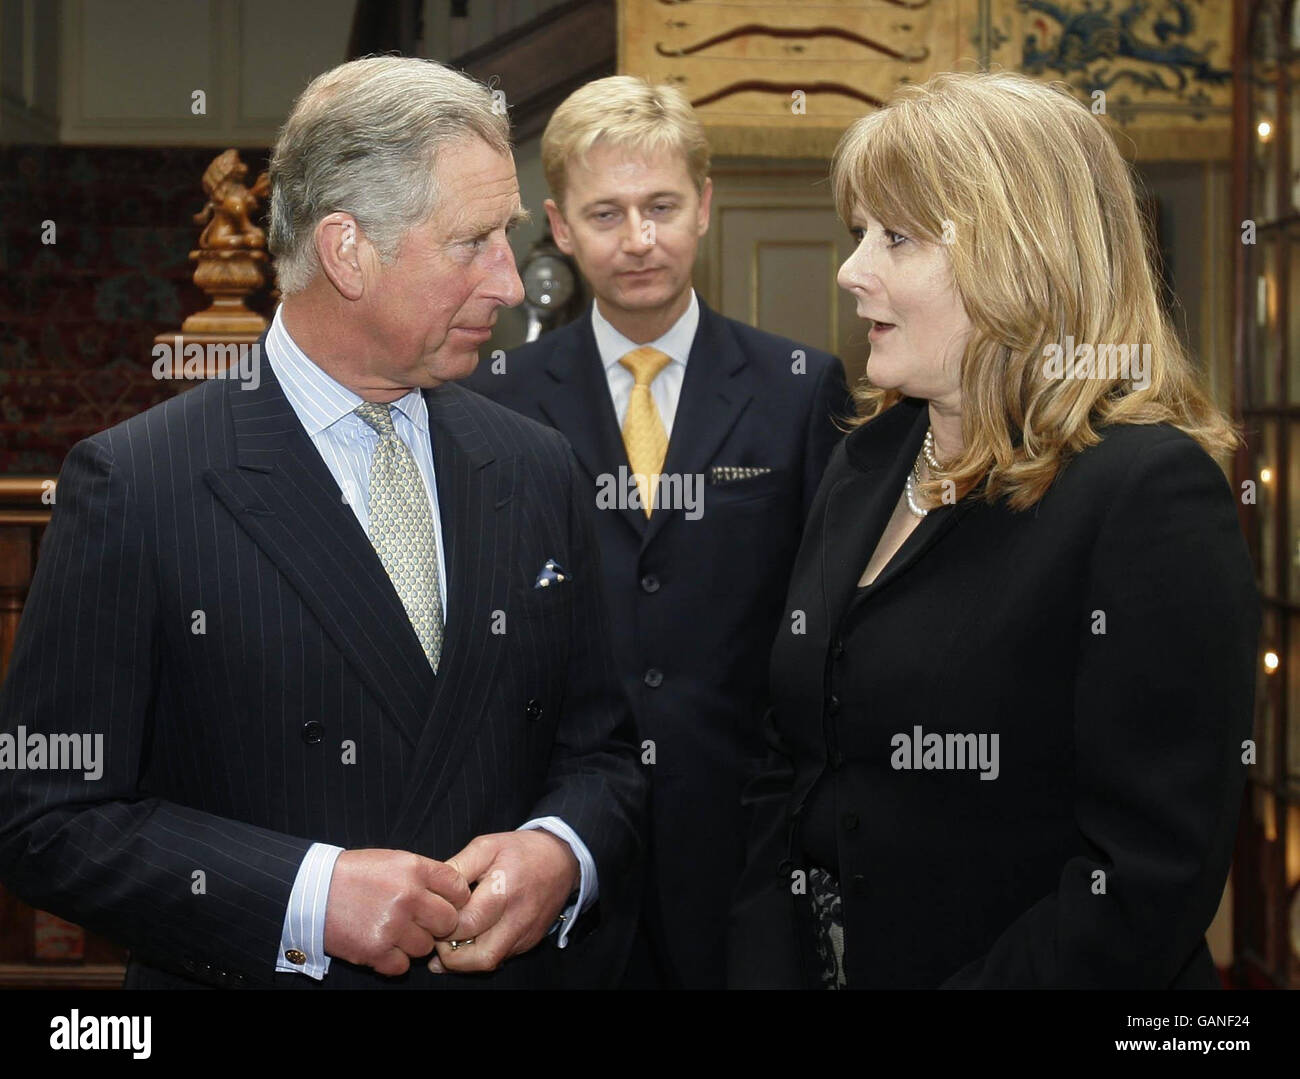 The Prince of Wales, left ,talks to Camilla Hellman who conceived the idea of a garden for the British victims of the September 11 terror attacks in New York, during a reception at Clarence House in London, this evening to mark the 5th anniversary of the founding of the New York garden which honours the British victims of the World Trade Centre attacks on 11th September 2001. Stock Photo